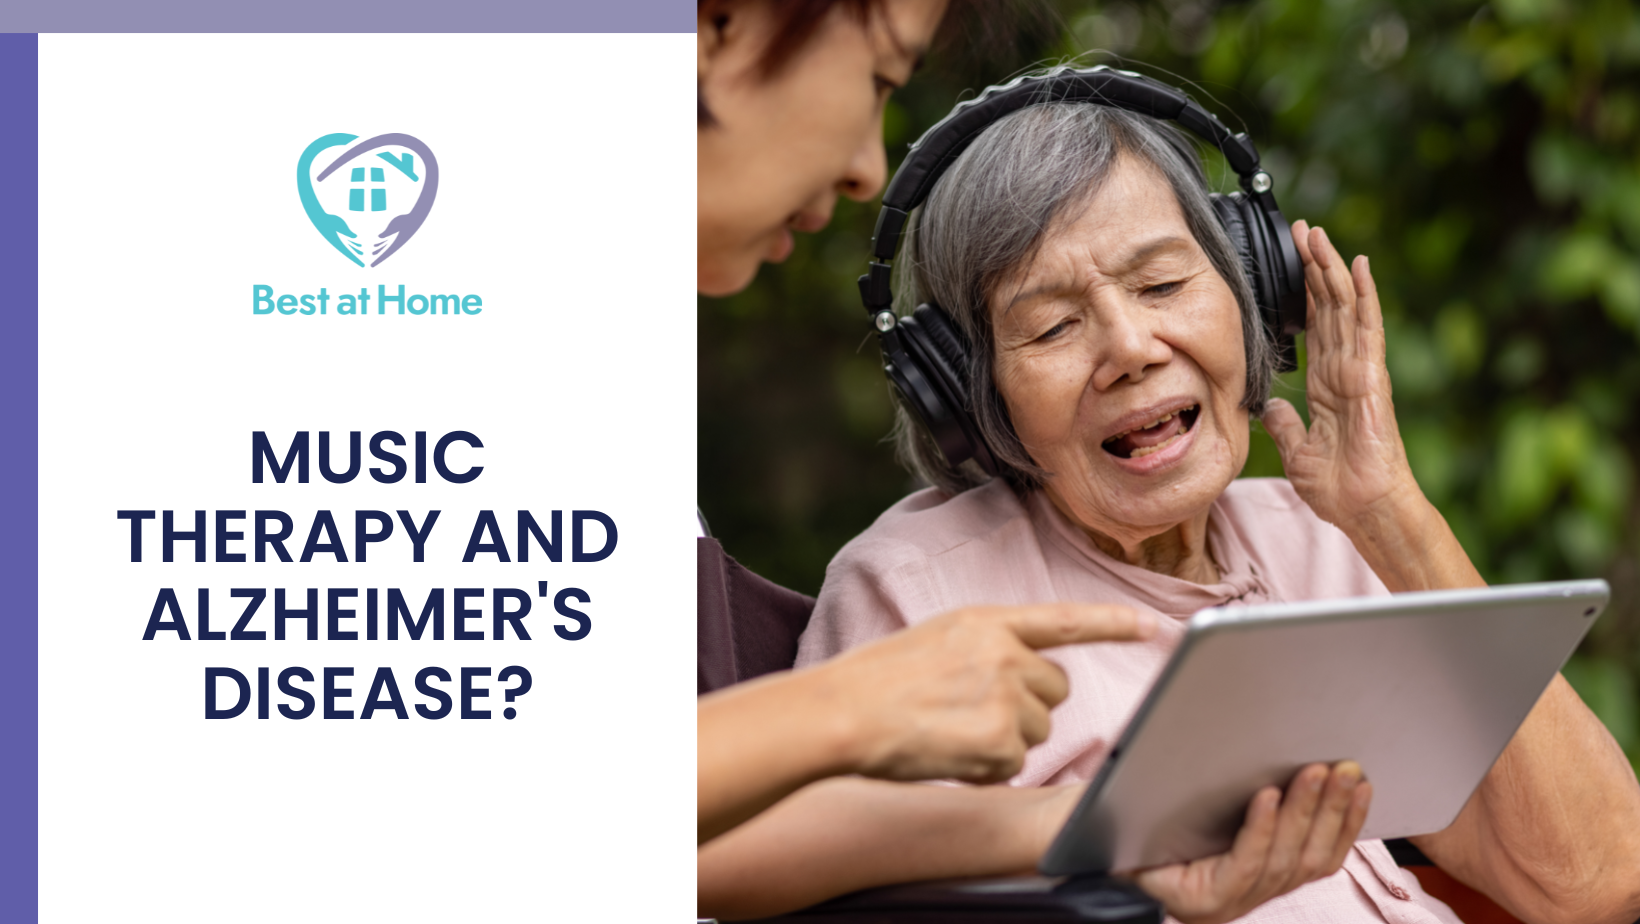 Music Therapy and Alzheimer's disease?